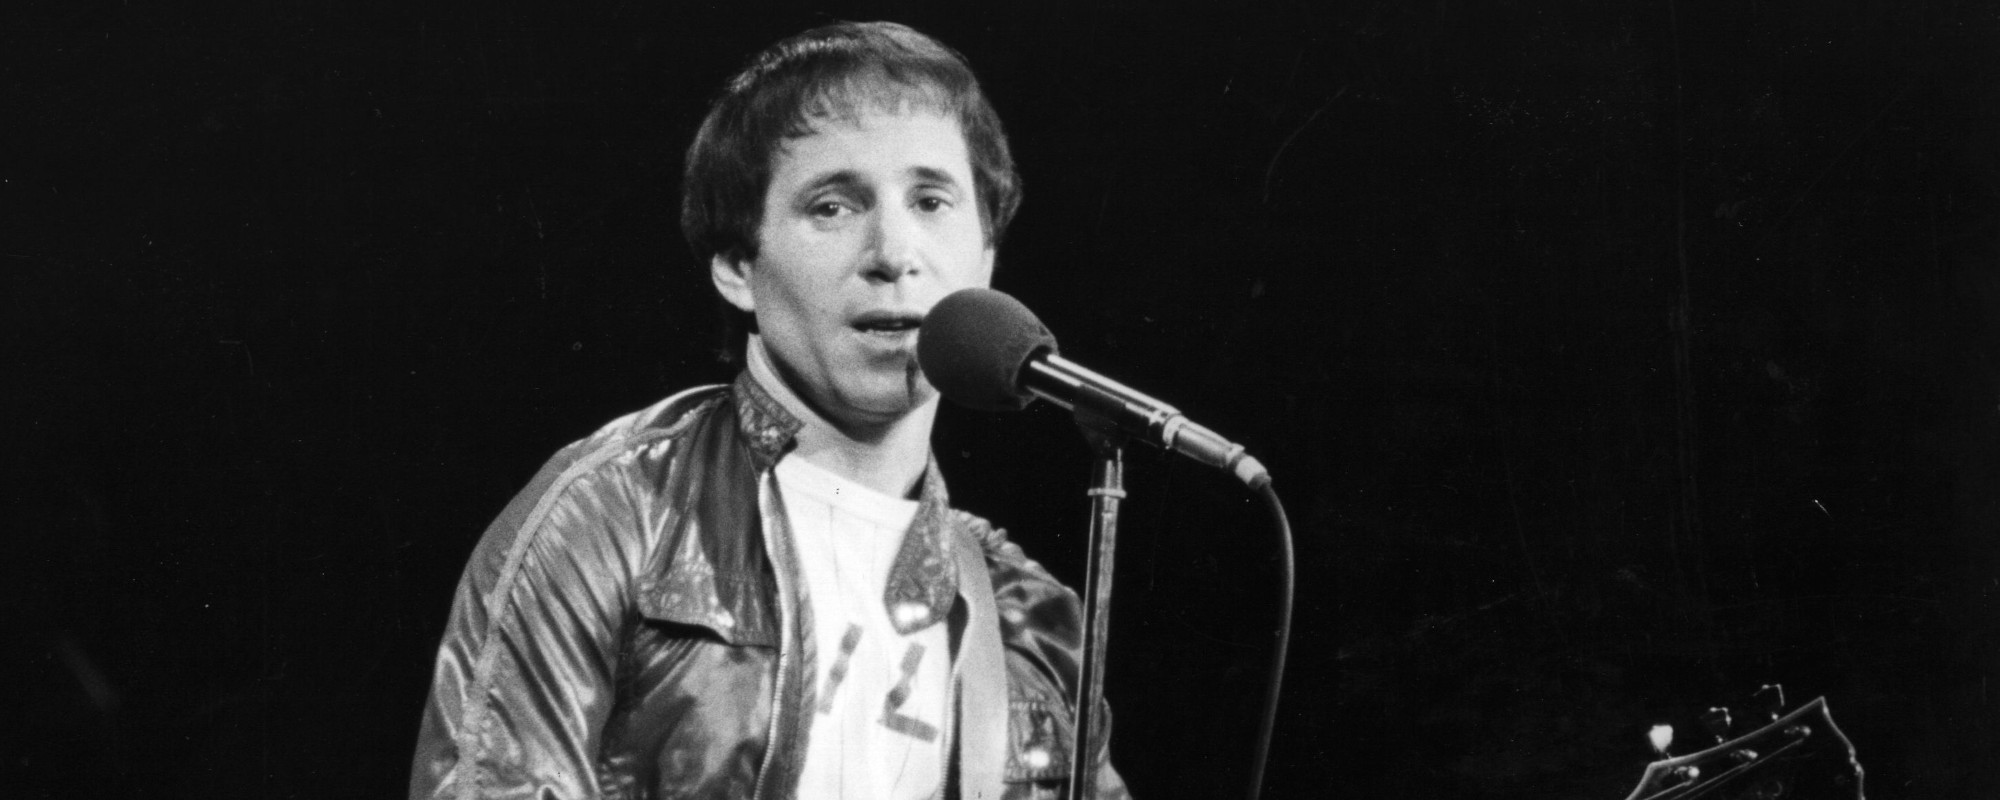 Making the Case for Paul Simon’s Underrated ’80s Album ‘Hearts and Bones’